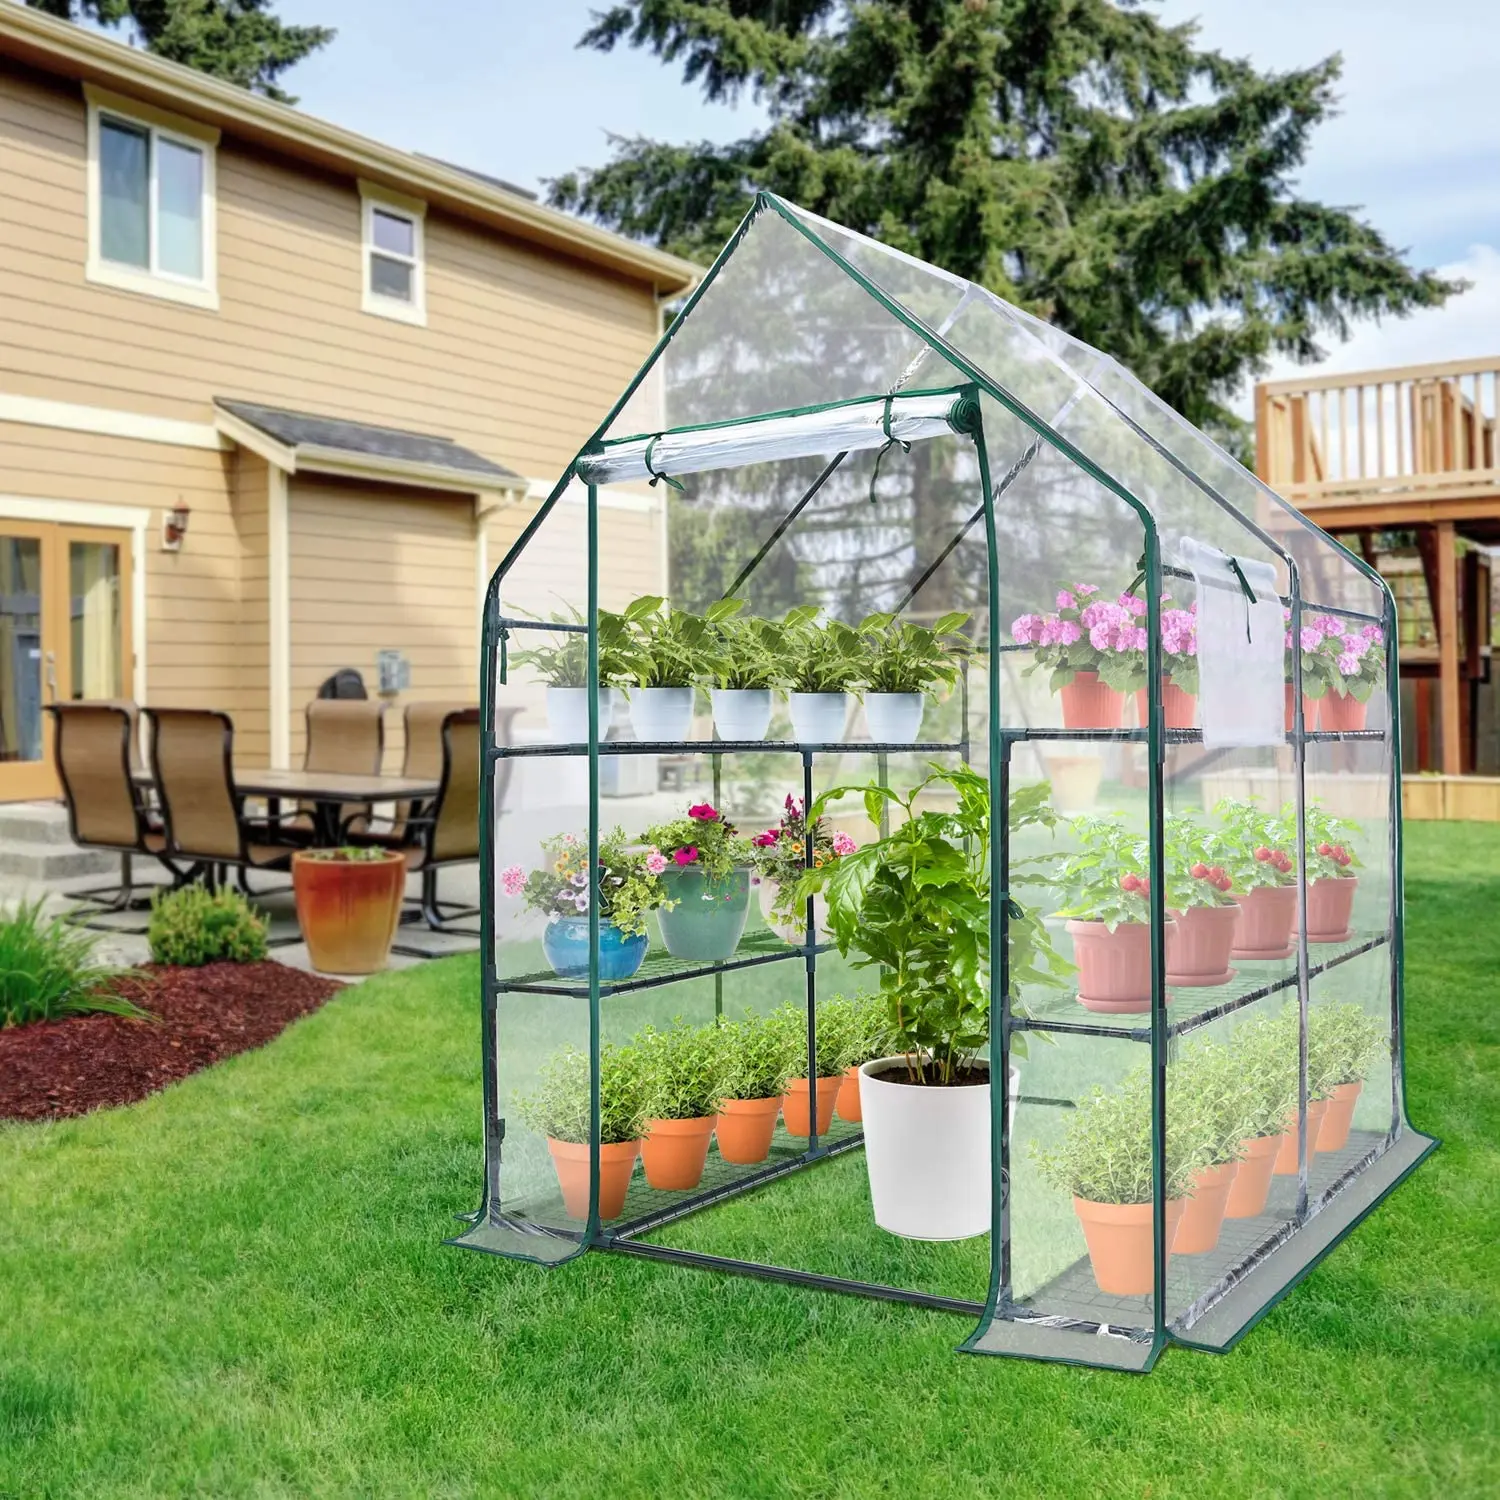 

Small Green house Outdoor Greenhouse Portable Greenhouse with Anchors and Roll-up Zipper Door,Grow Plants Seedling Herbs or Flow, Transparent